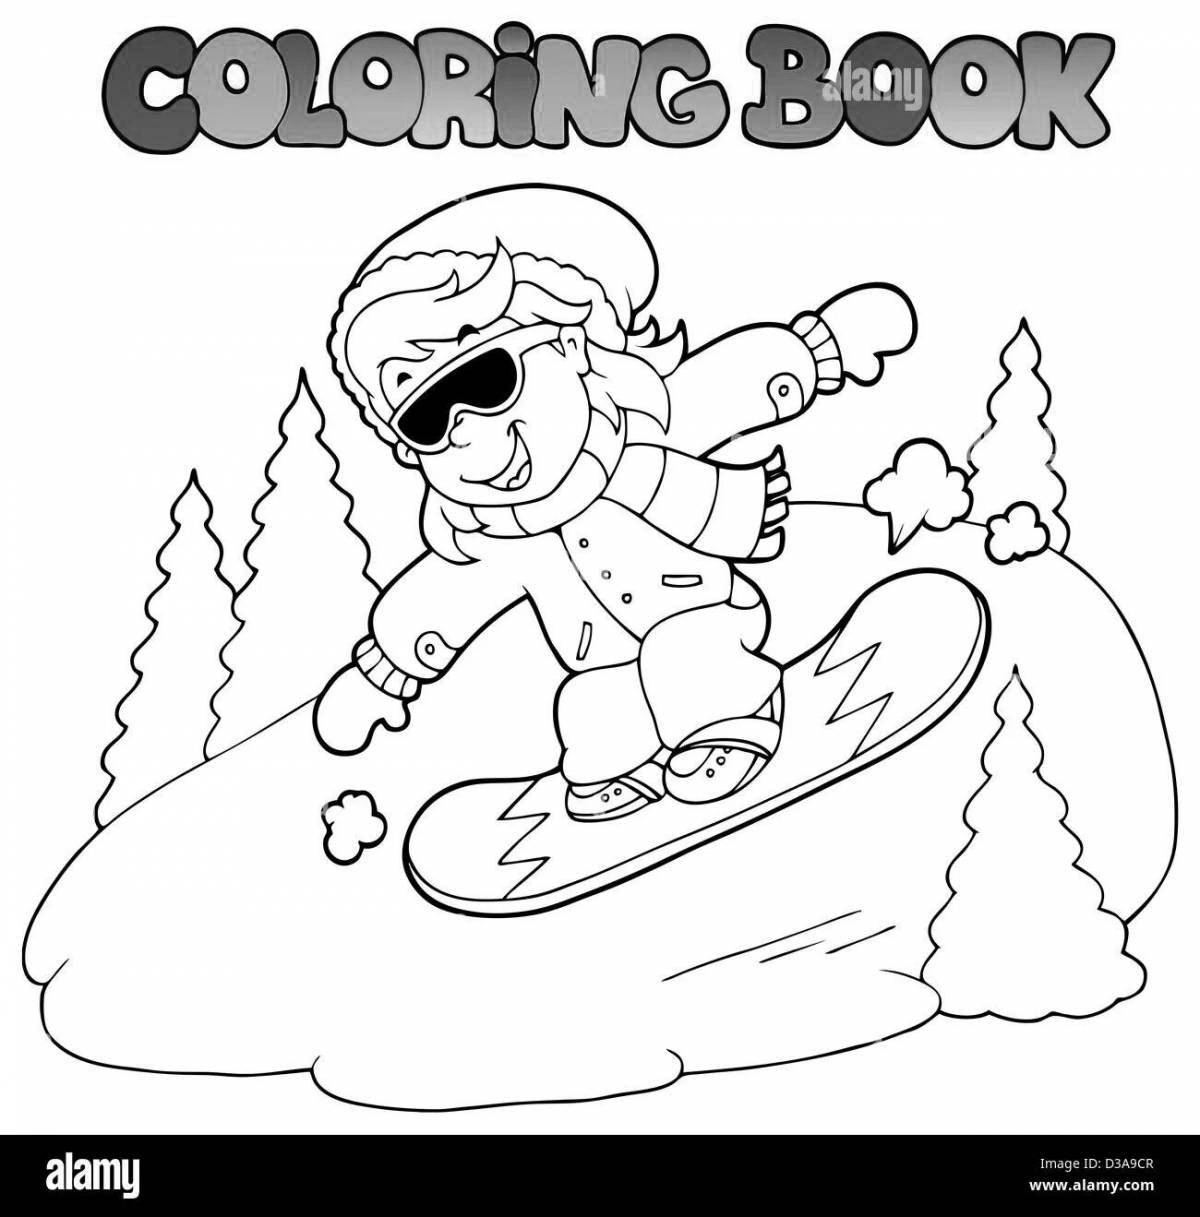 Amazing snowboarder coloring book